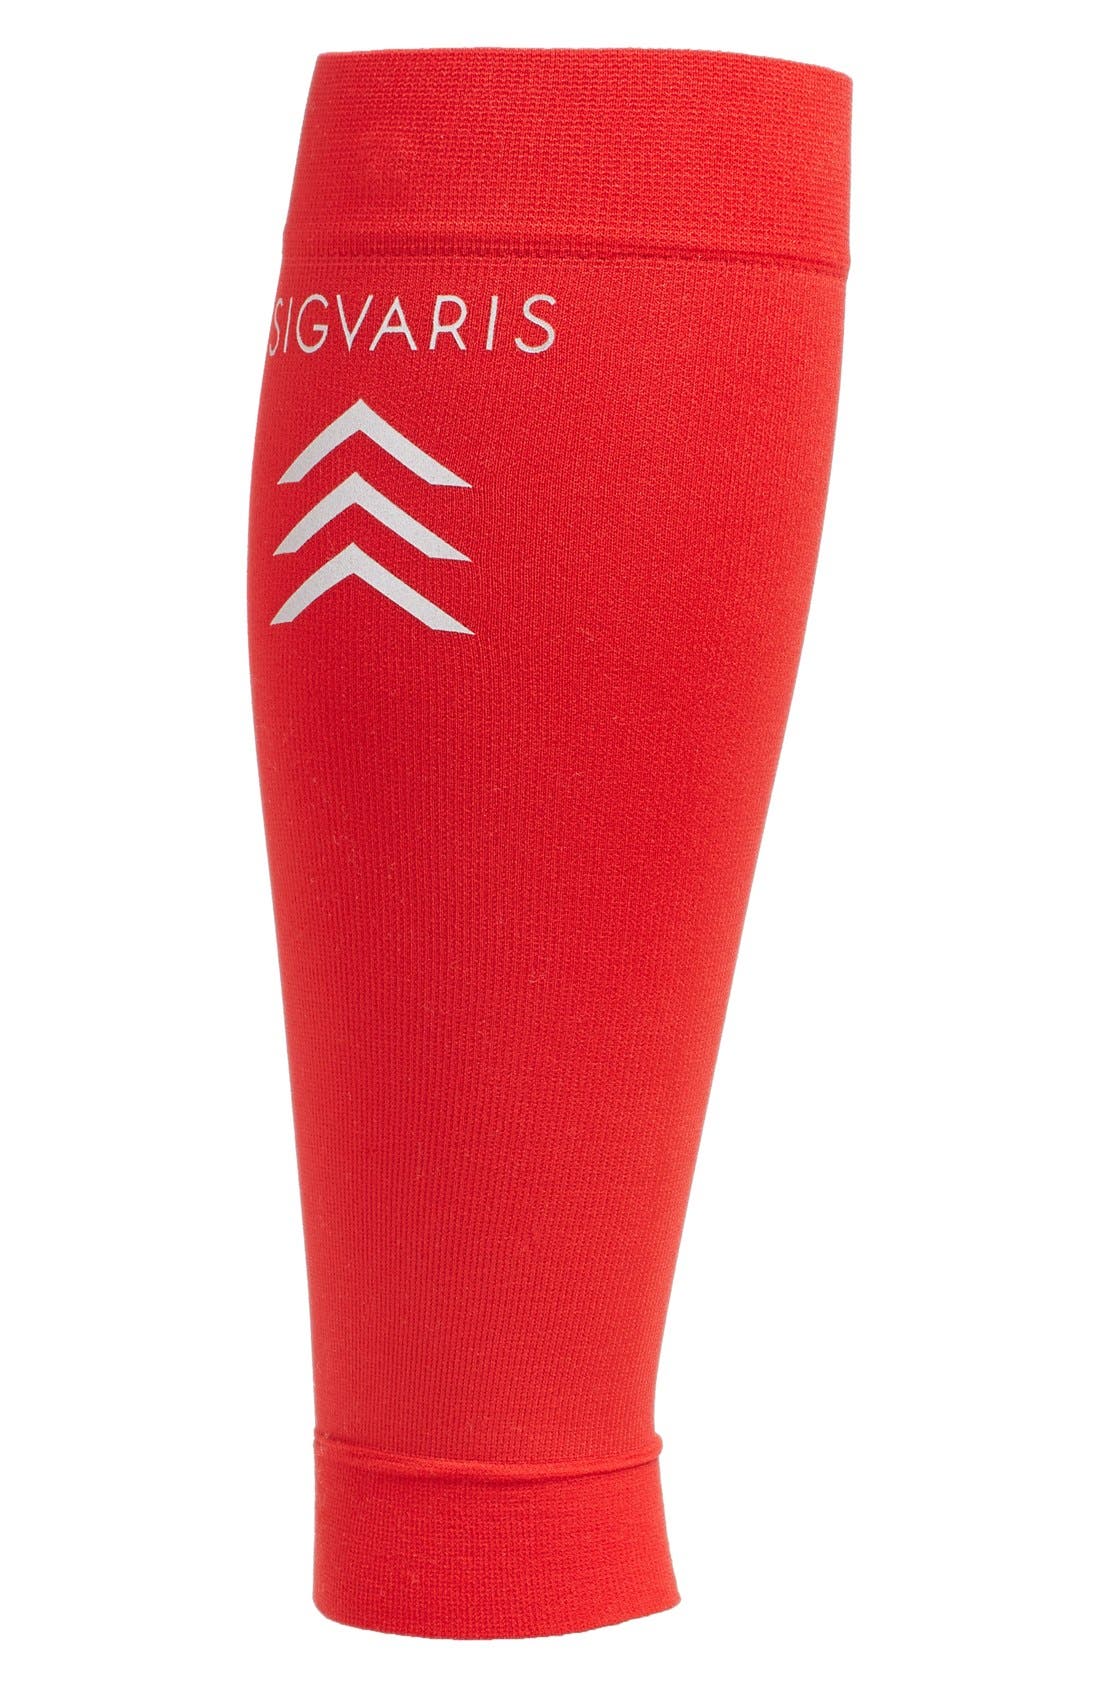 UPC 745129219901 product image for Men's Insignia By Sigvaris 'Sports' Graduated Compression Performance Calf Sleev | upcitemdb.com